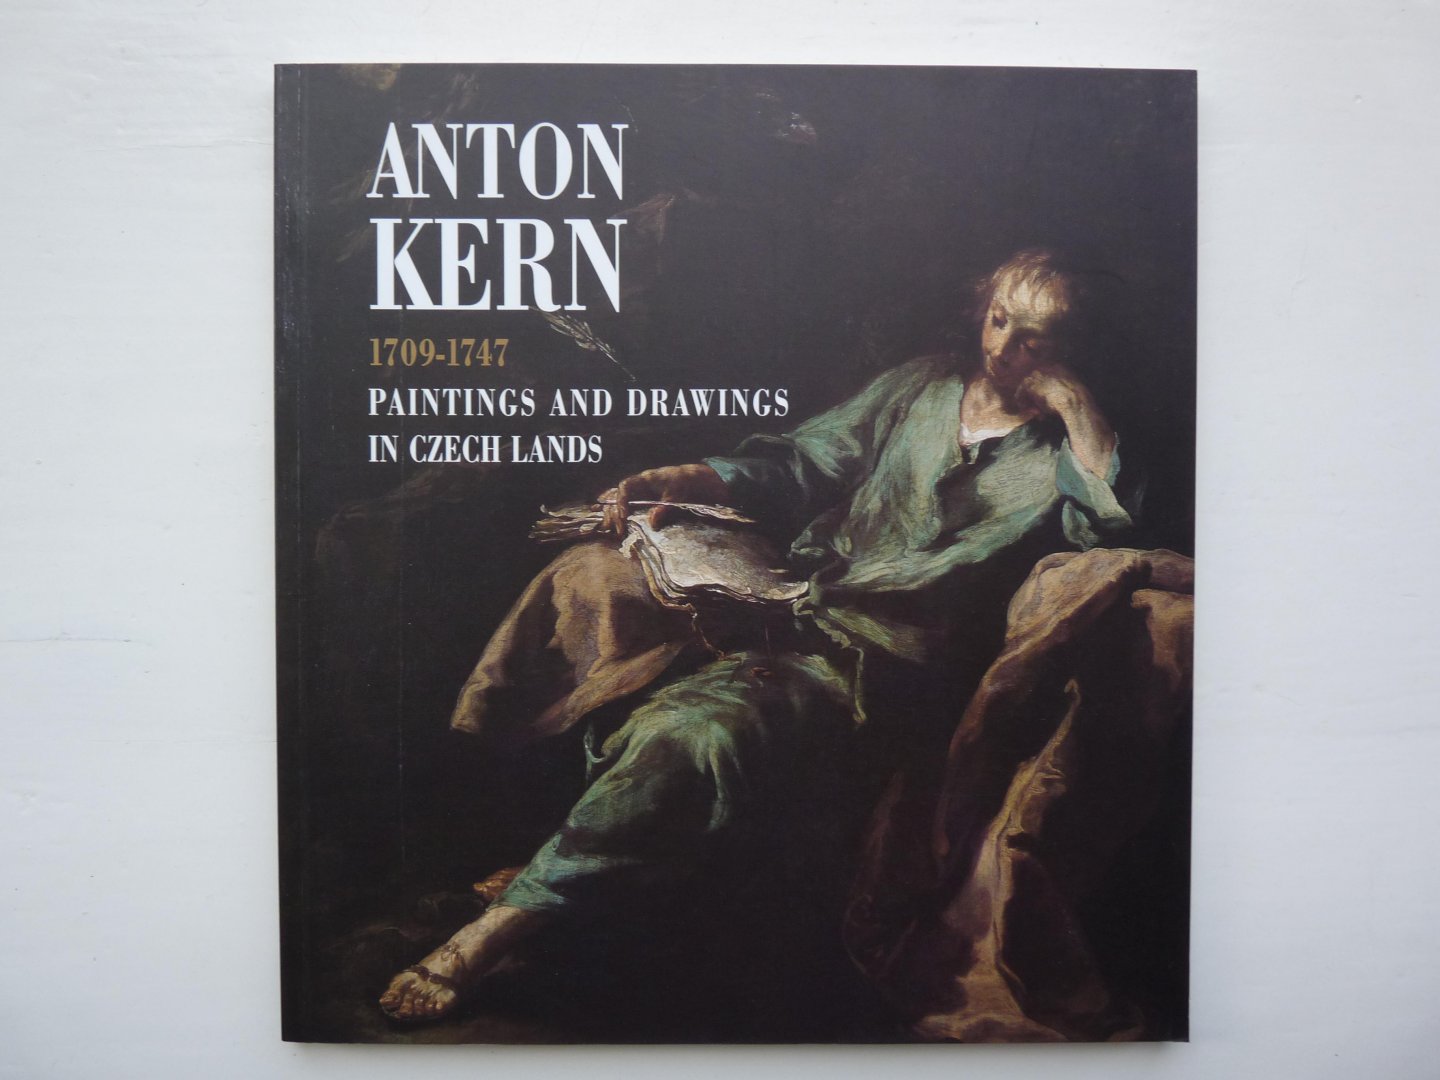 Preiss, Pavel - Anton Kern (1709-1747): a Venetian Master of the Saxon and Bohemian Rococo : Paintings and Drawings in Czech Lands